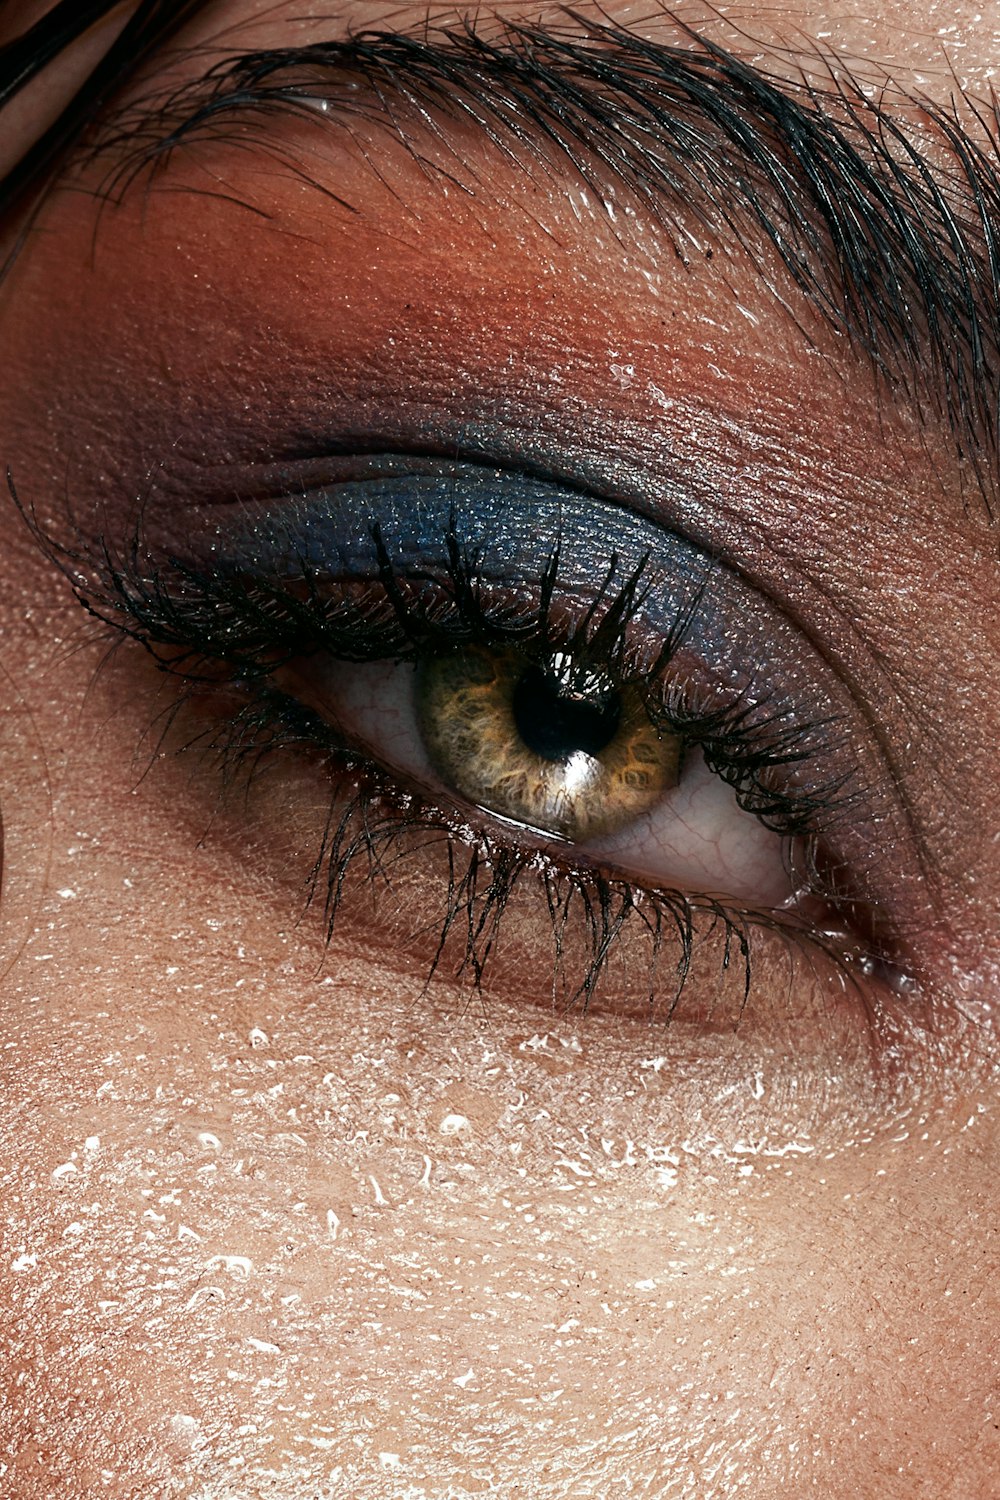 a close up of a person's eye with makeup